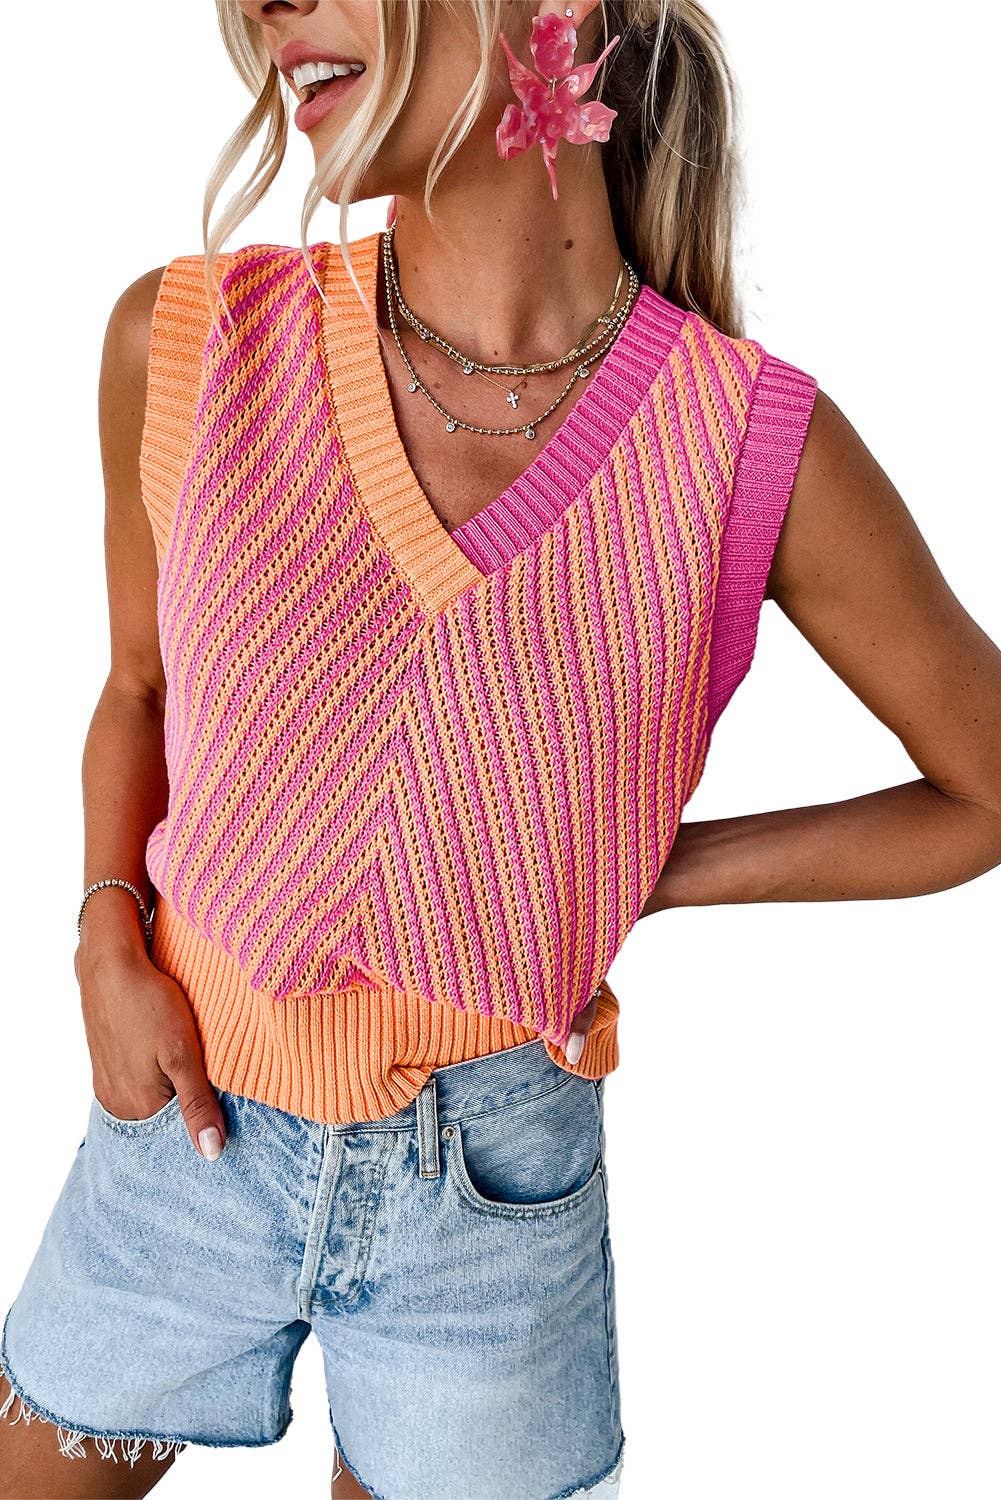 Strawberry Pink Contrast Chevron Knit Sweater Top